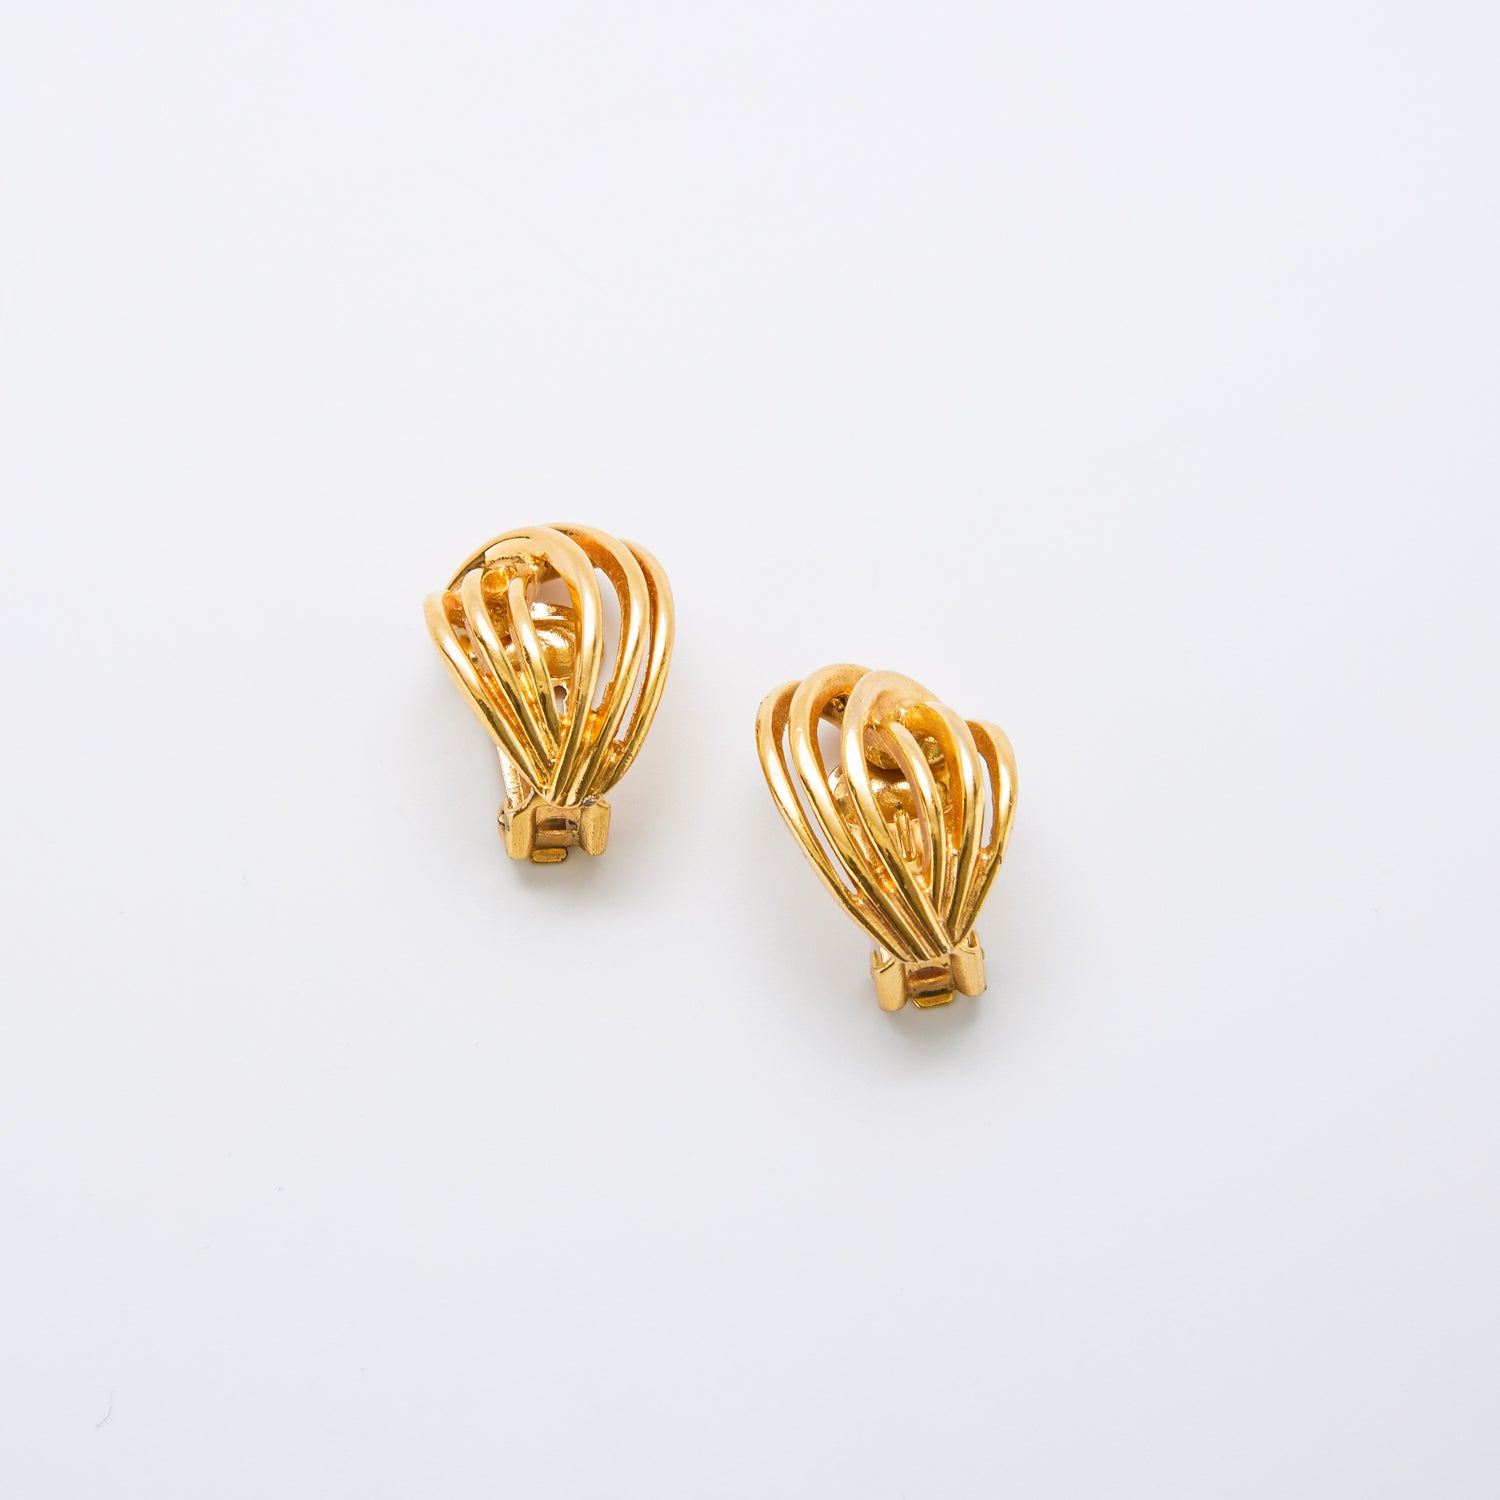 Vintage Christian Dior Gold Clip-on Earrings